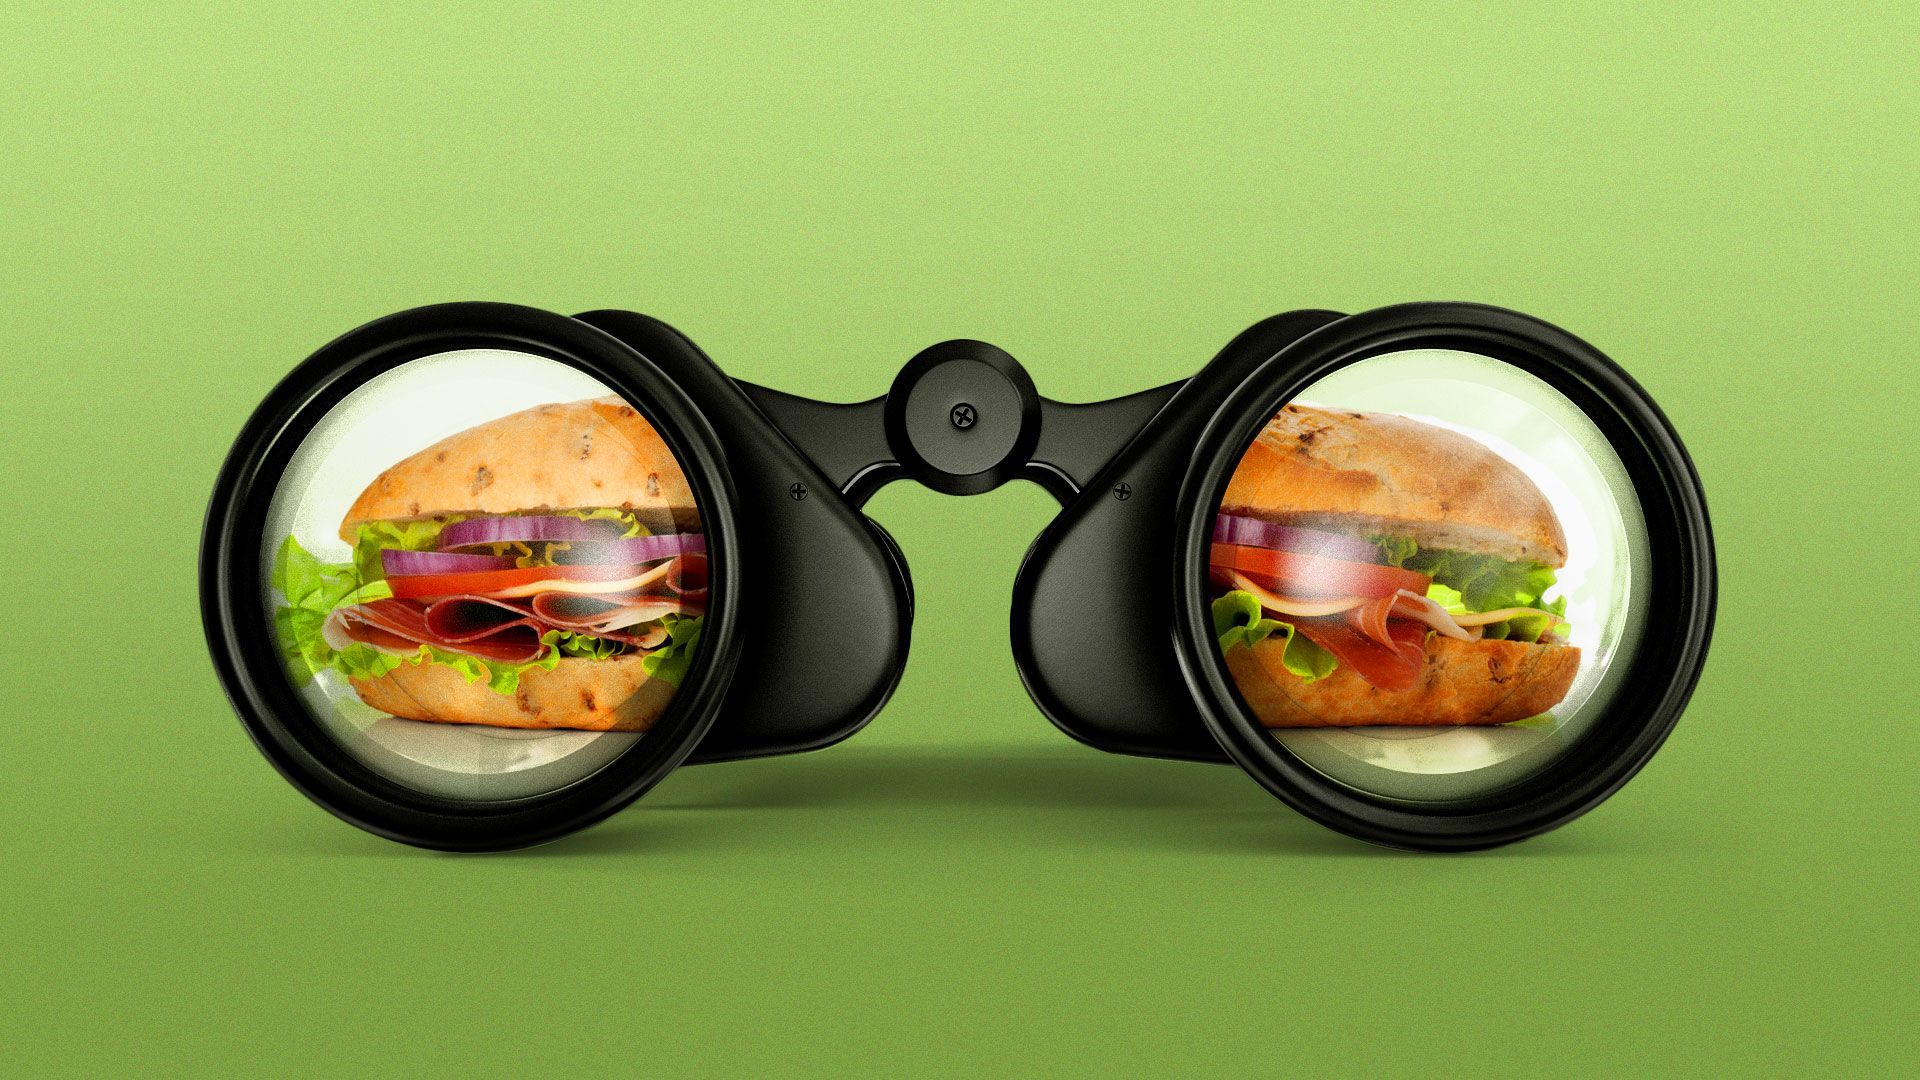 Illustration of a pair of binoculars with a sandwich reflected in the lenses.